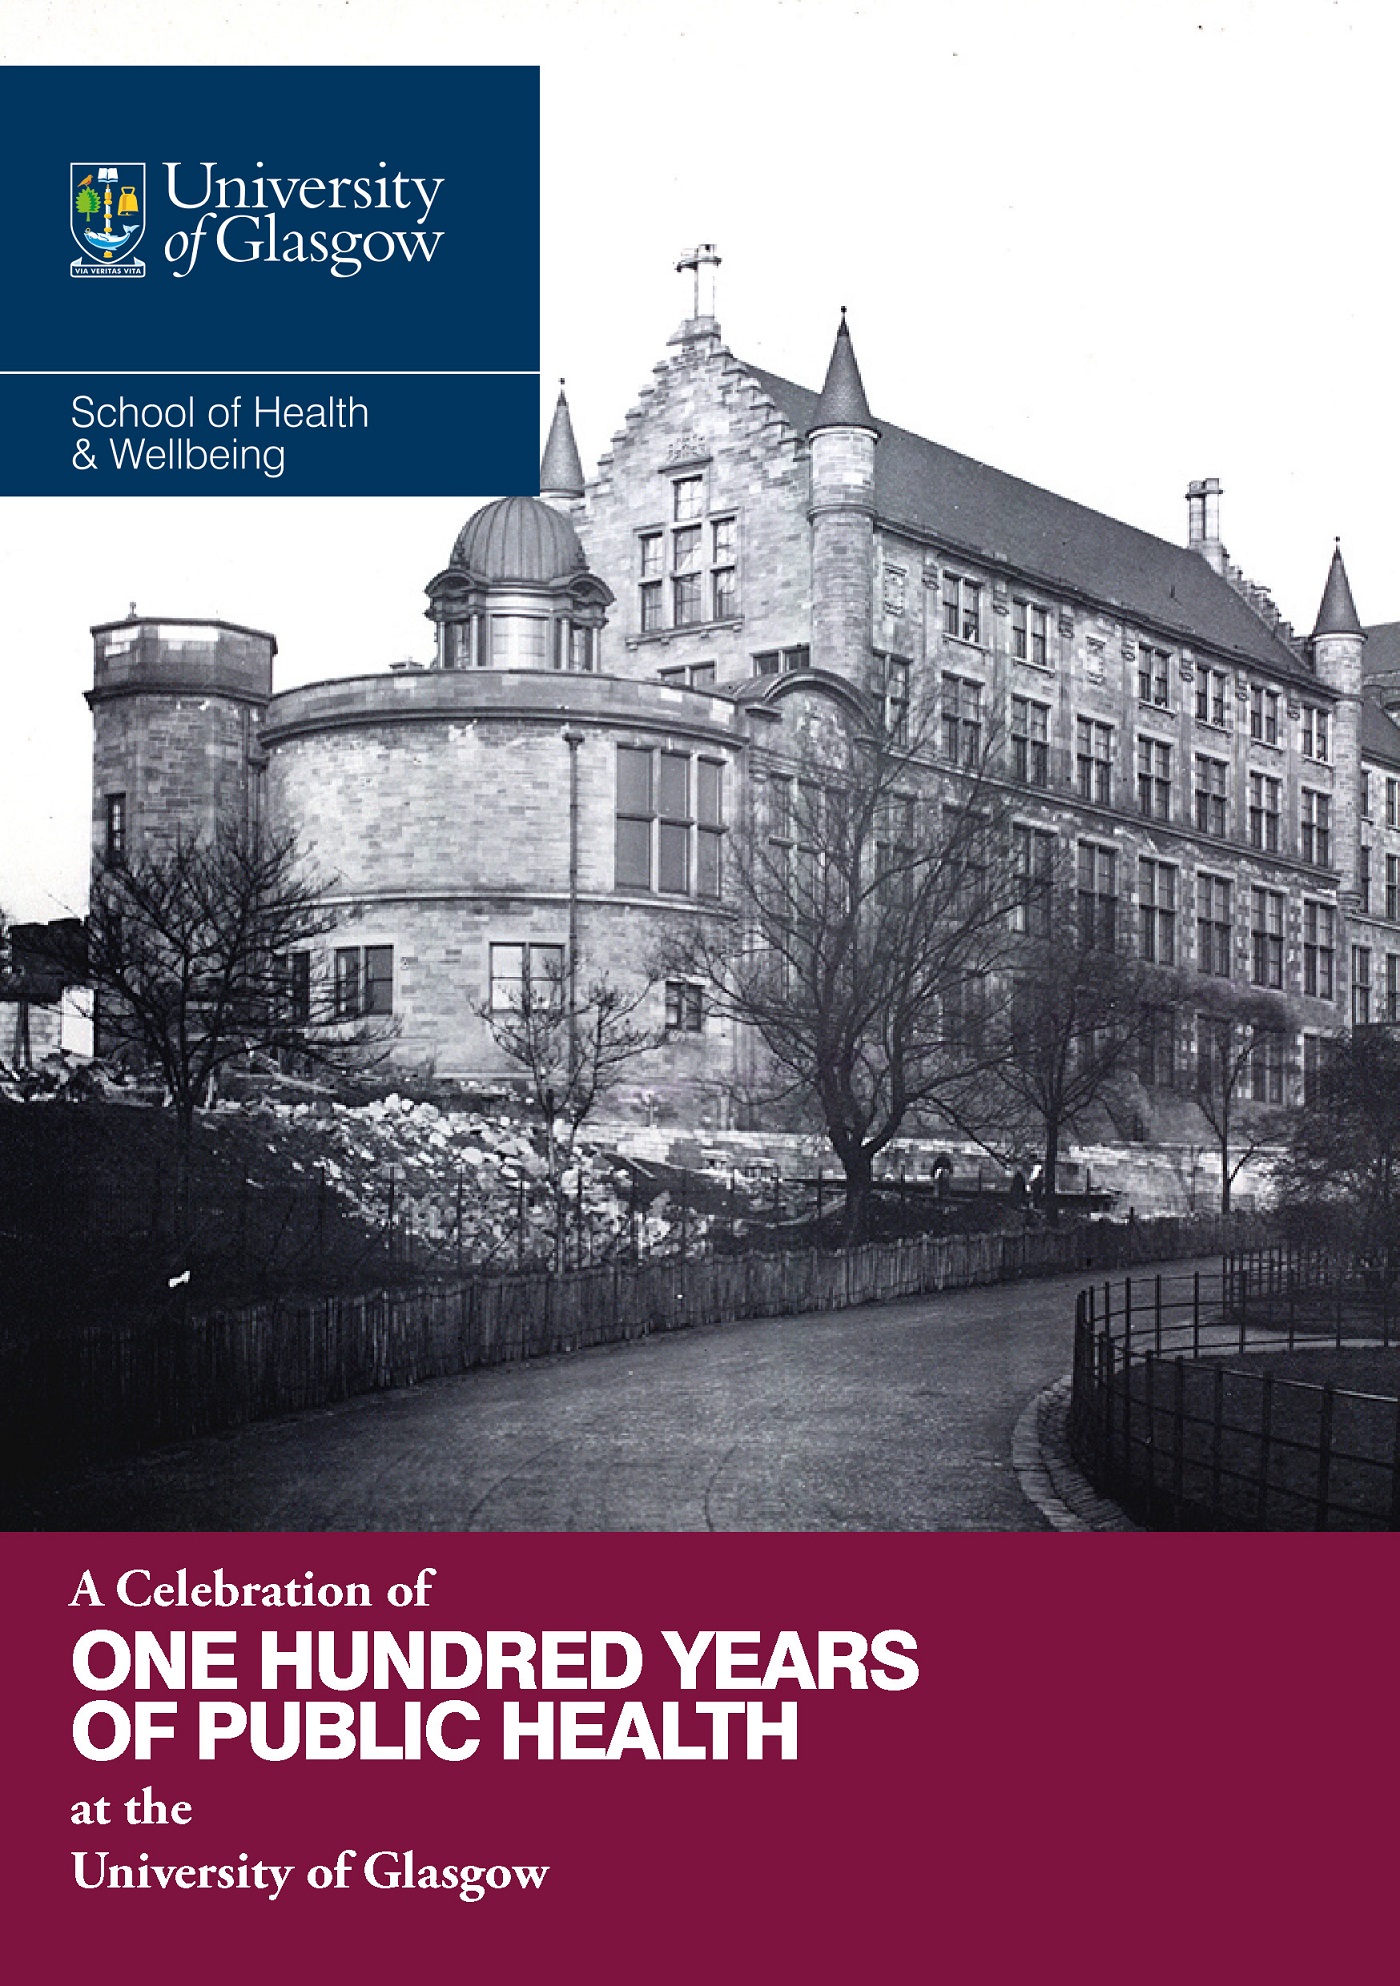 100 years of public health booklet front page image